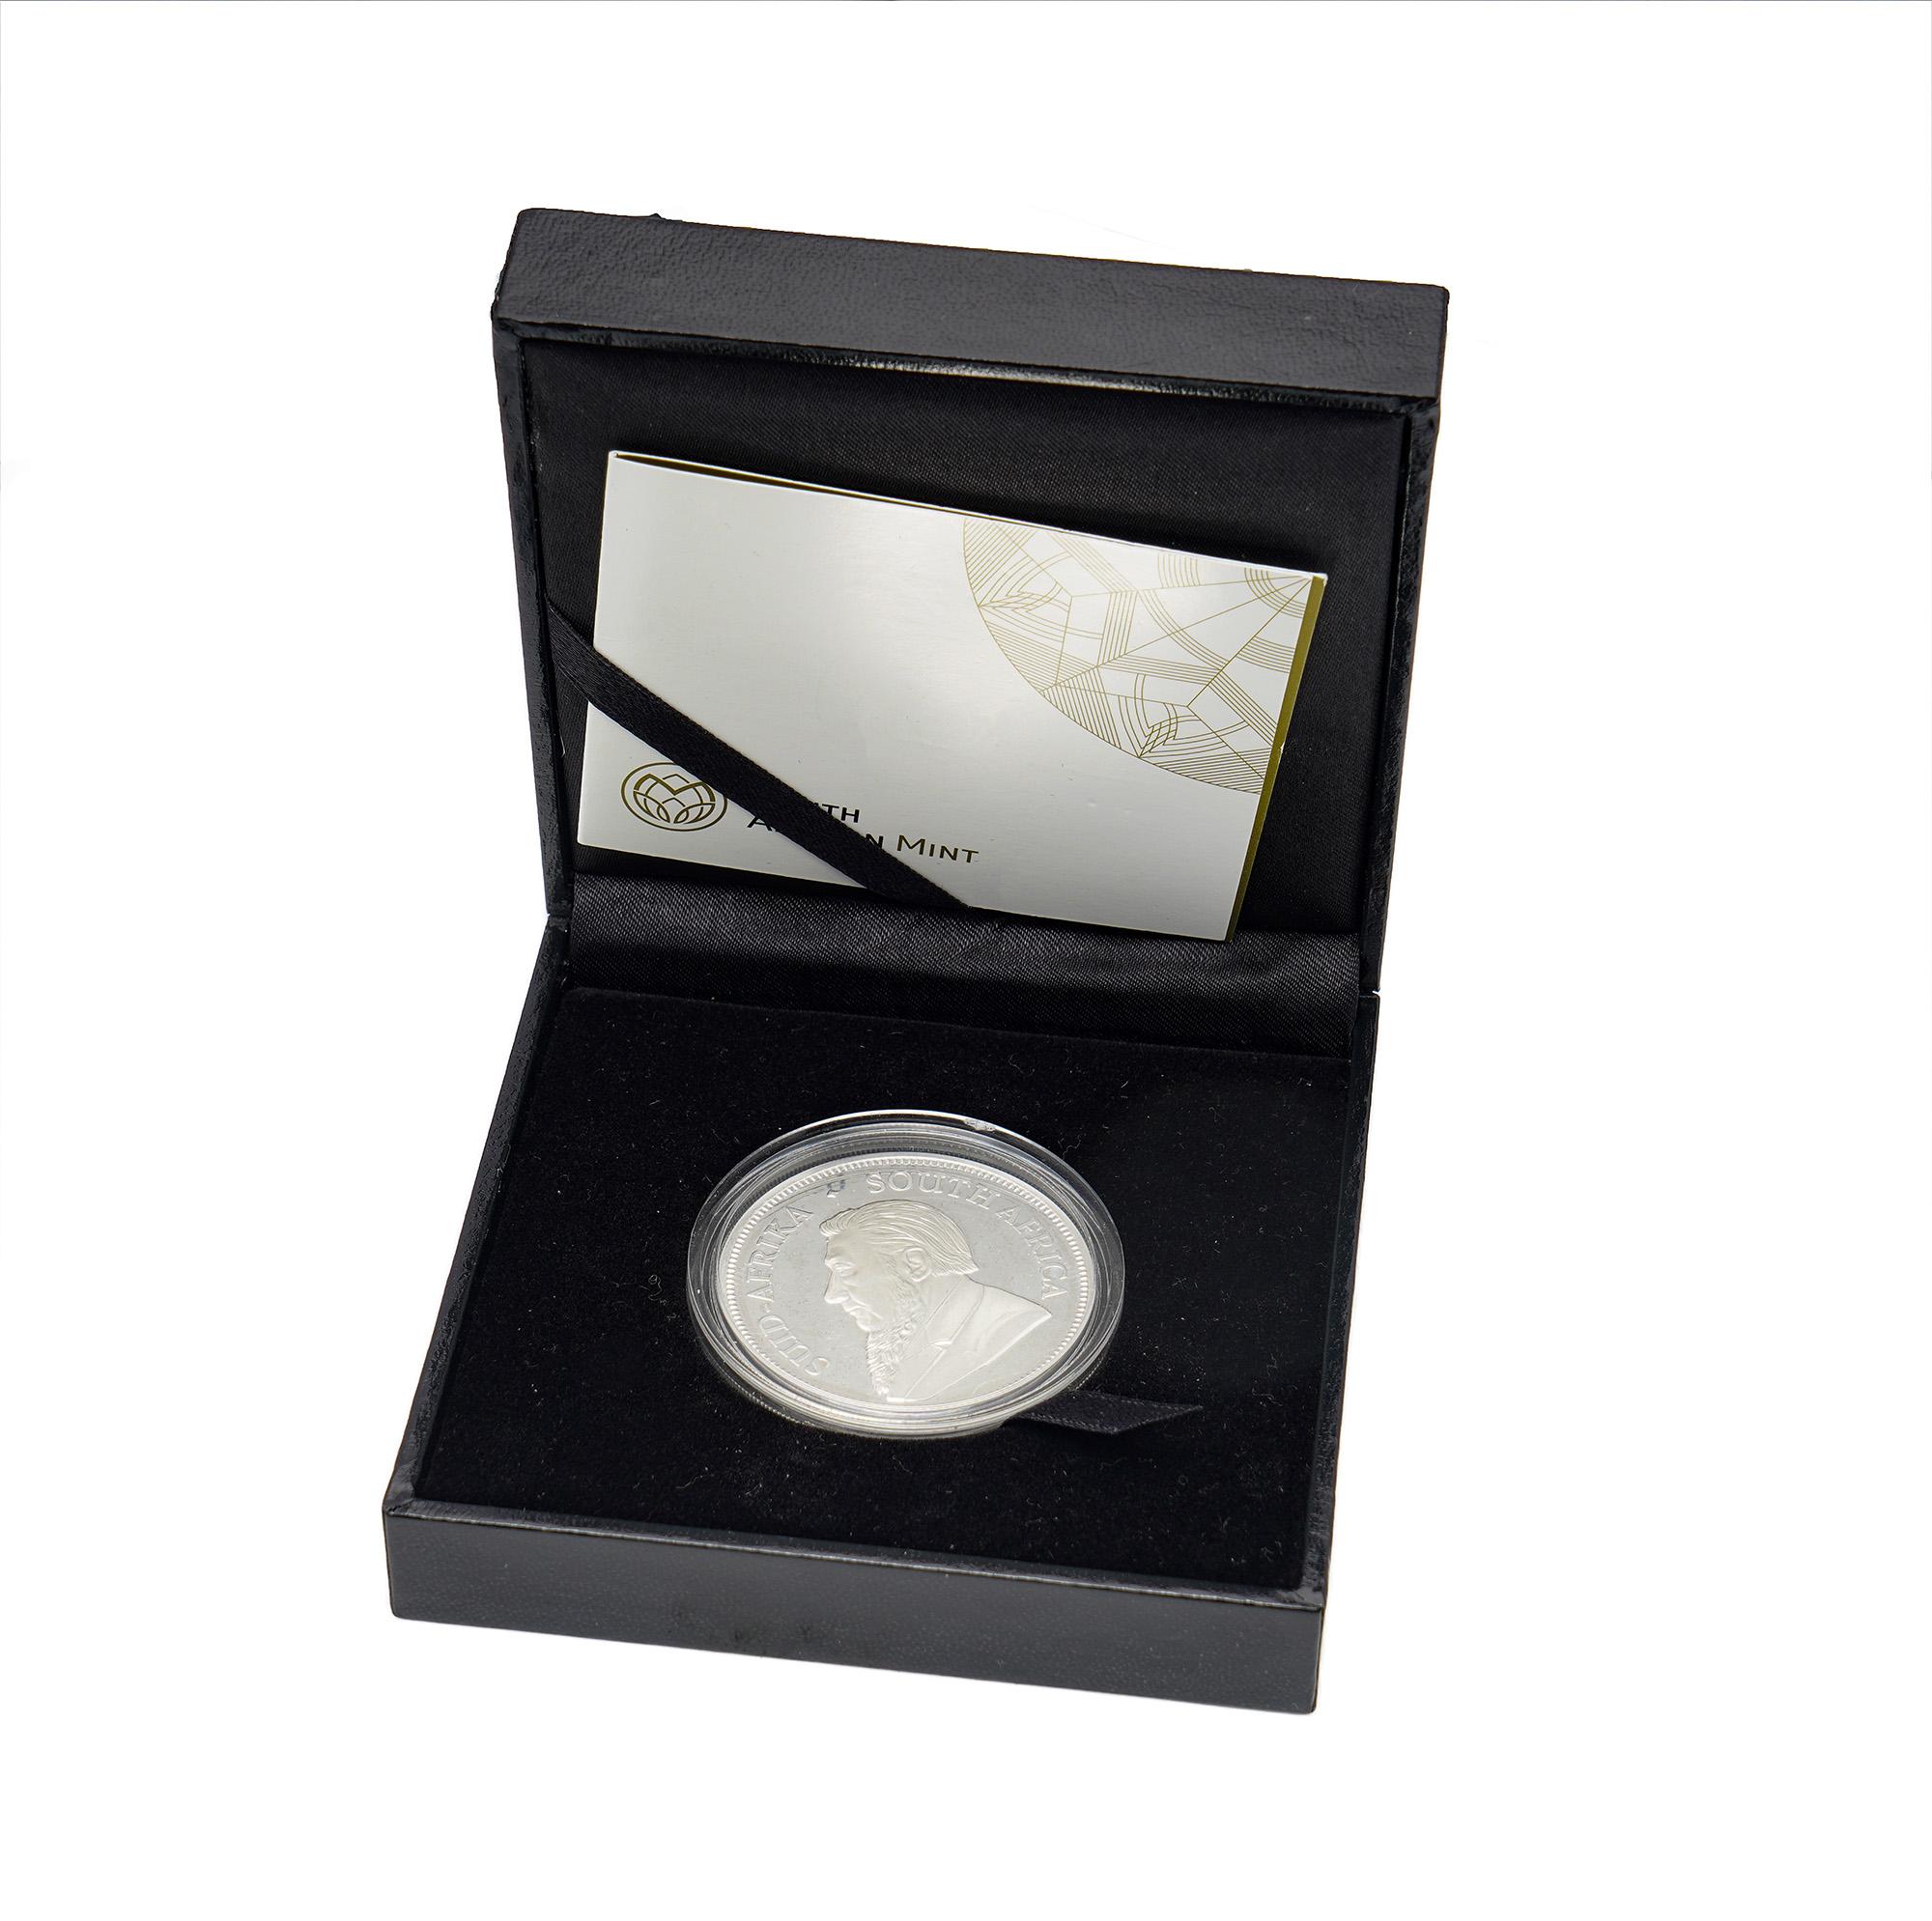 2018 1oz silver Krugerrand 999. Silver Limited edition 15000/11077 Proof

The first President of the Zuid Afrikaansche Republiek ( ZAR ) who was responsible for this country's first legal coinage in 1890 is depicted on the obverse.
The design was